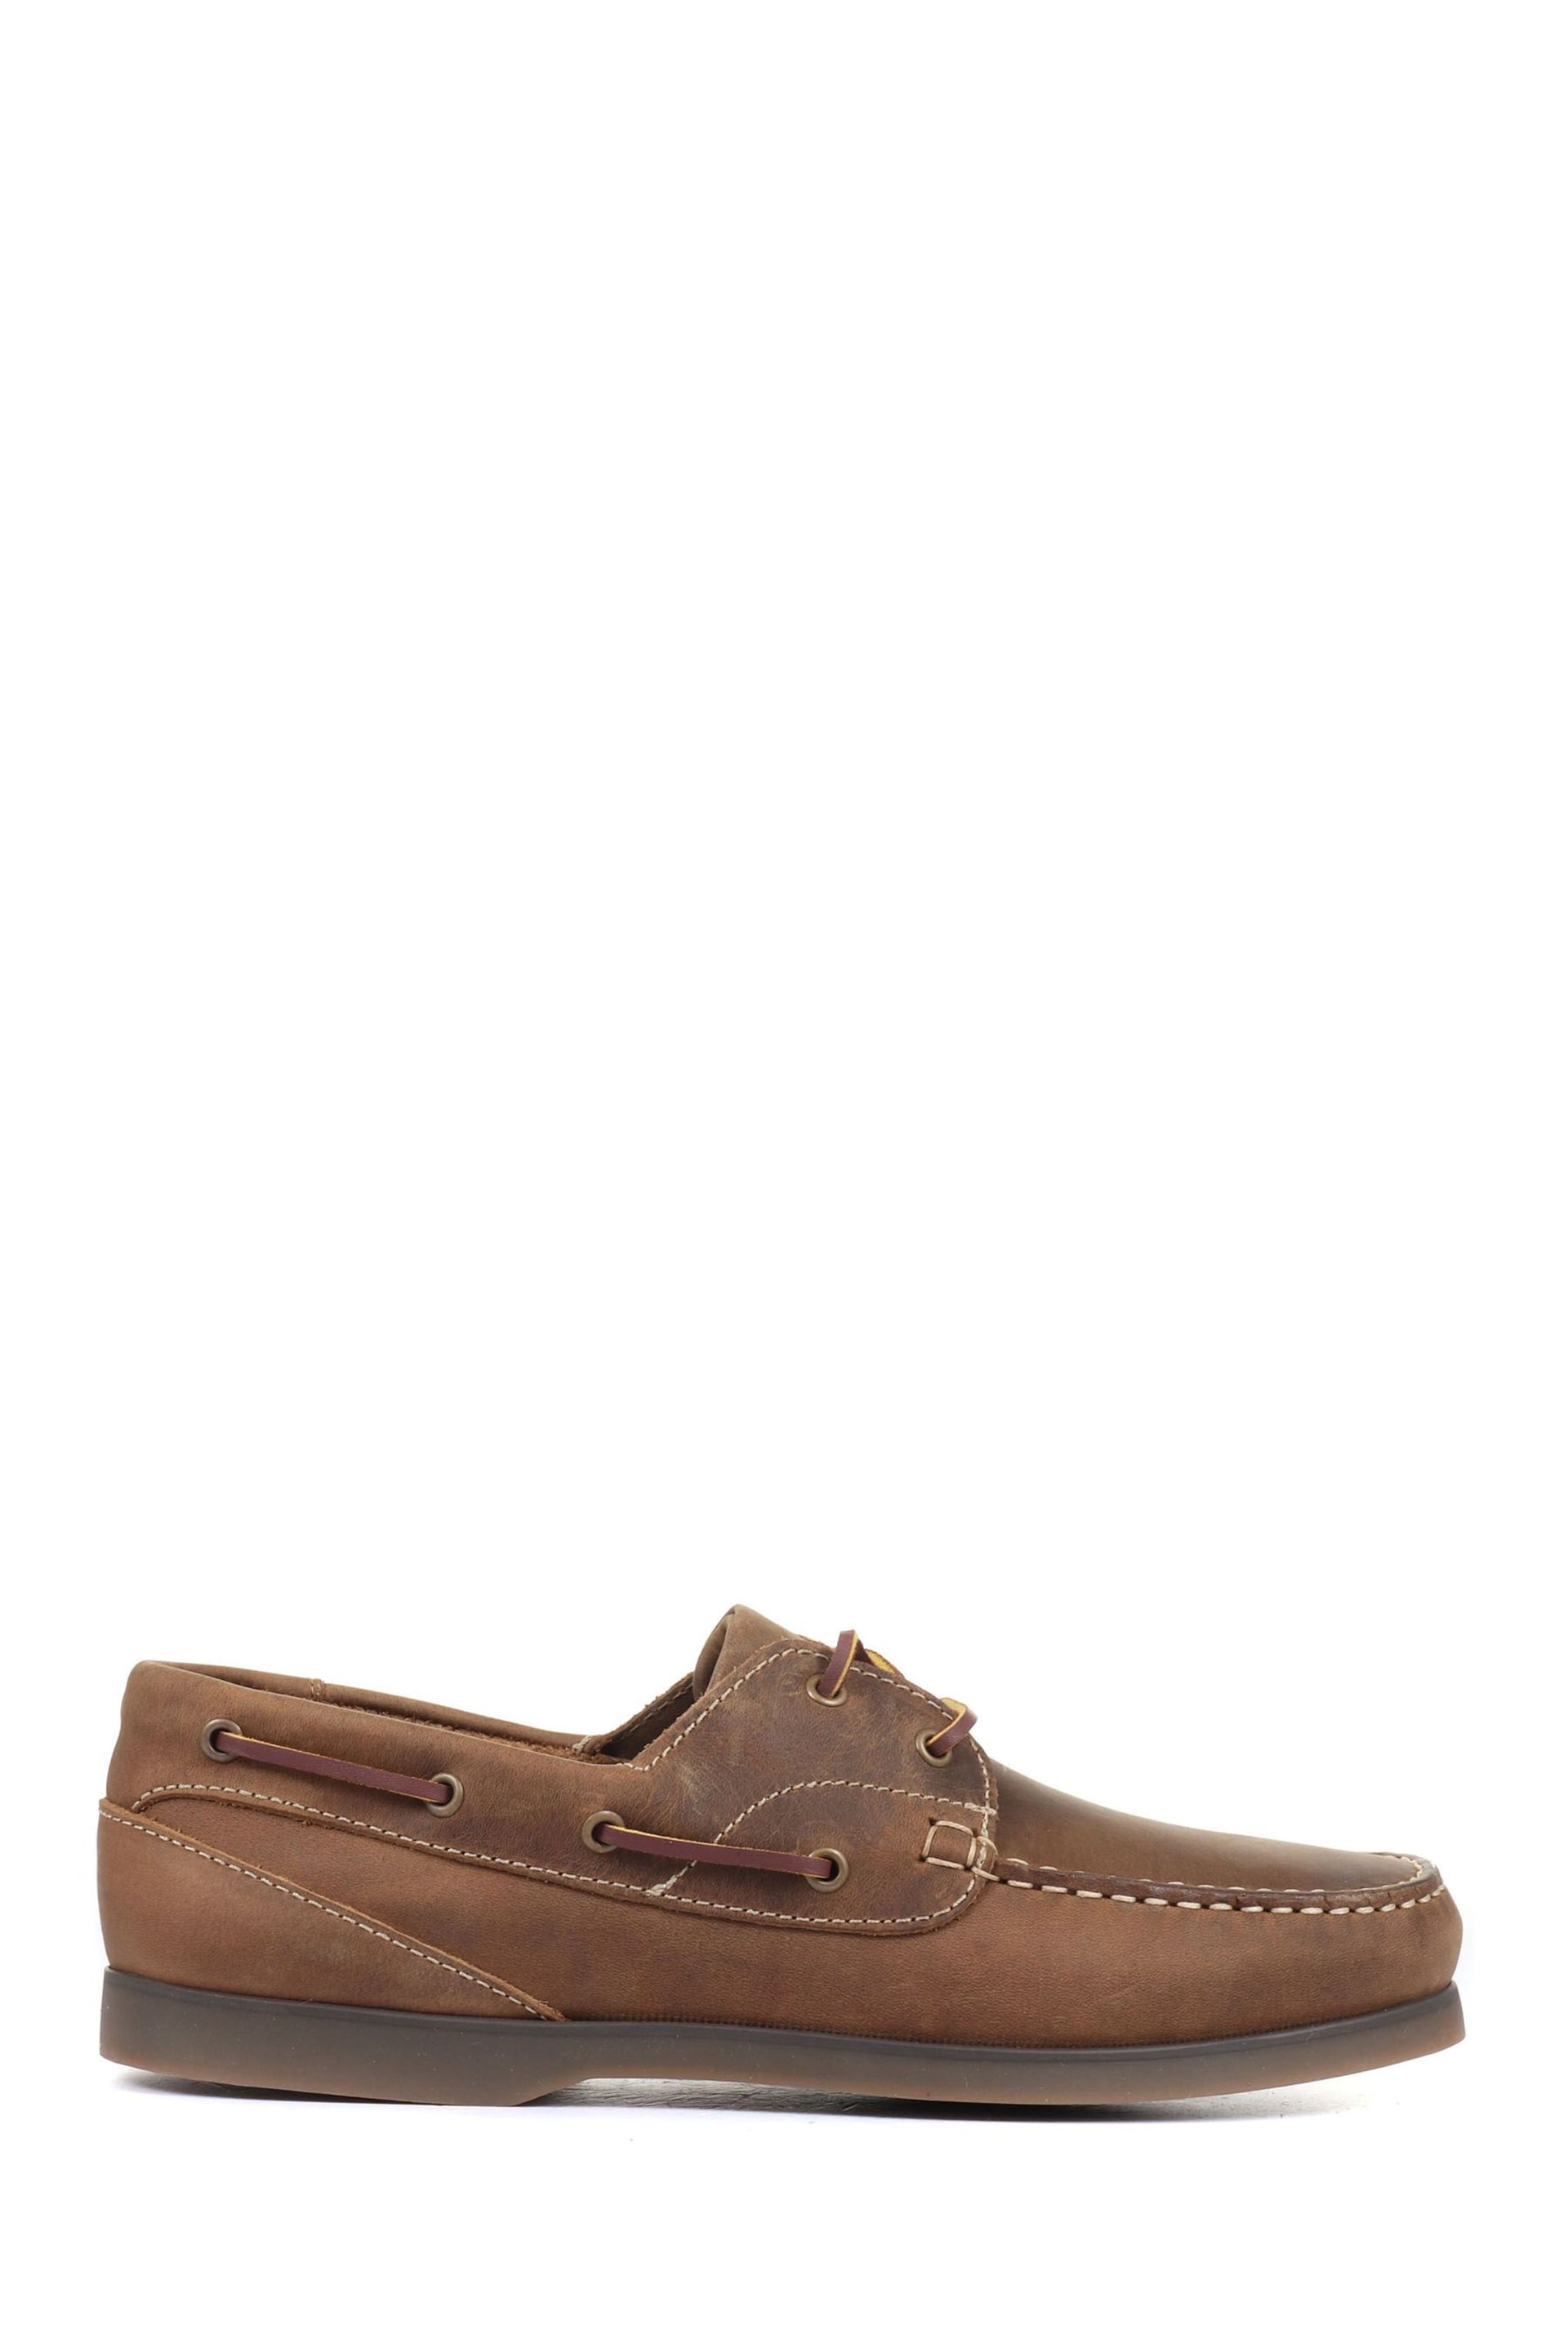 Jones Bootmaker Parsons Leather Boat Brown Shoes - Image 2 of 6